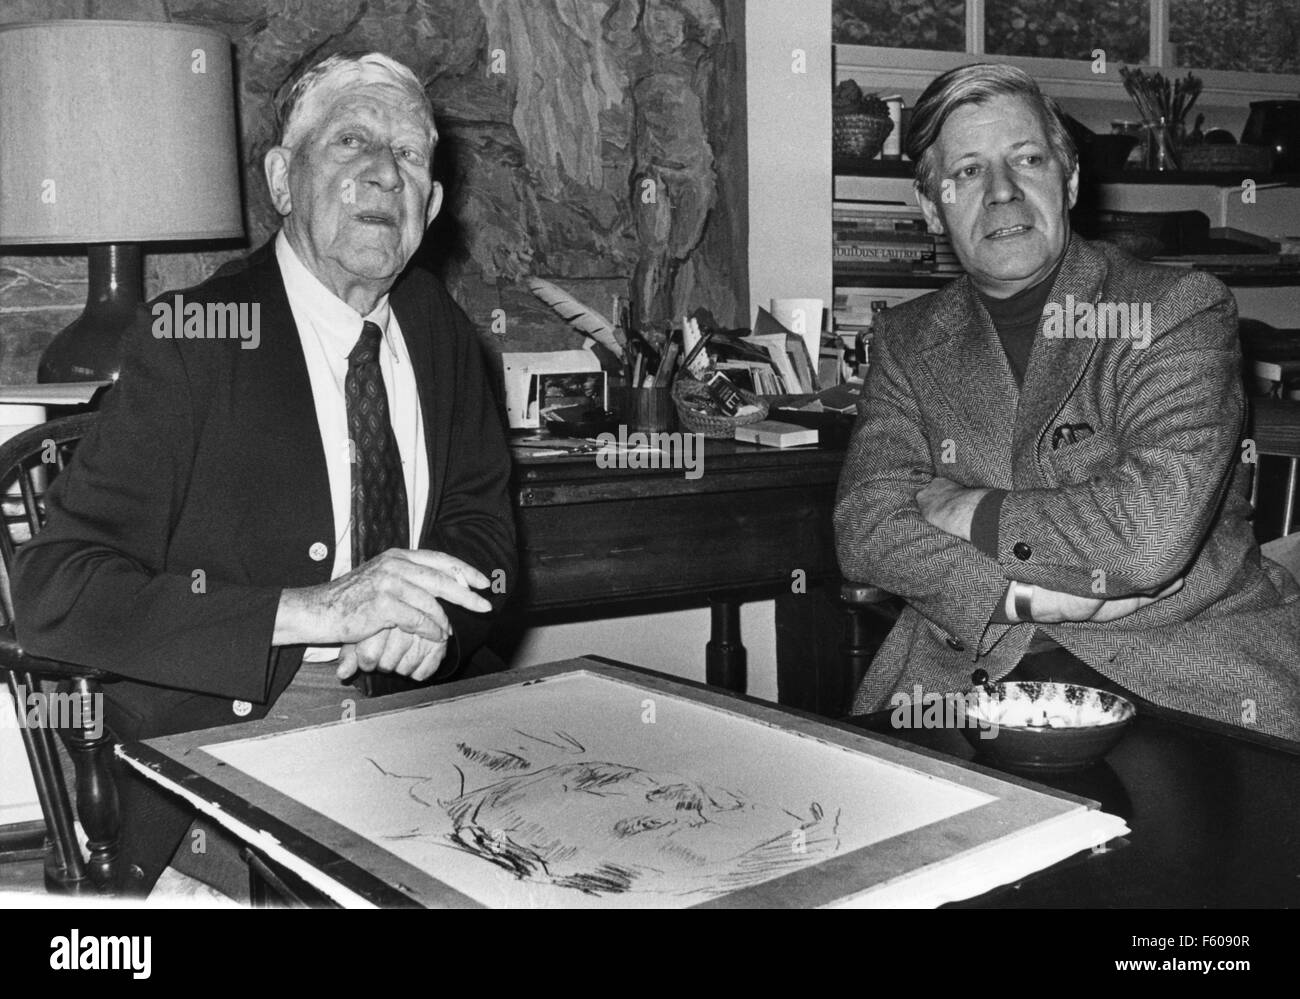 Artist Oskar Kokoschka (L) is sitting together with Chancellor Helmut Schmidt at his home in Villeneuve on 29 October 1976. A portrait sketch of the Chancellor is lying in front of them. Stock Photo